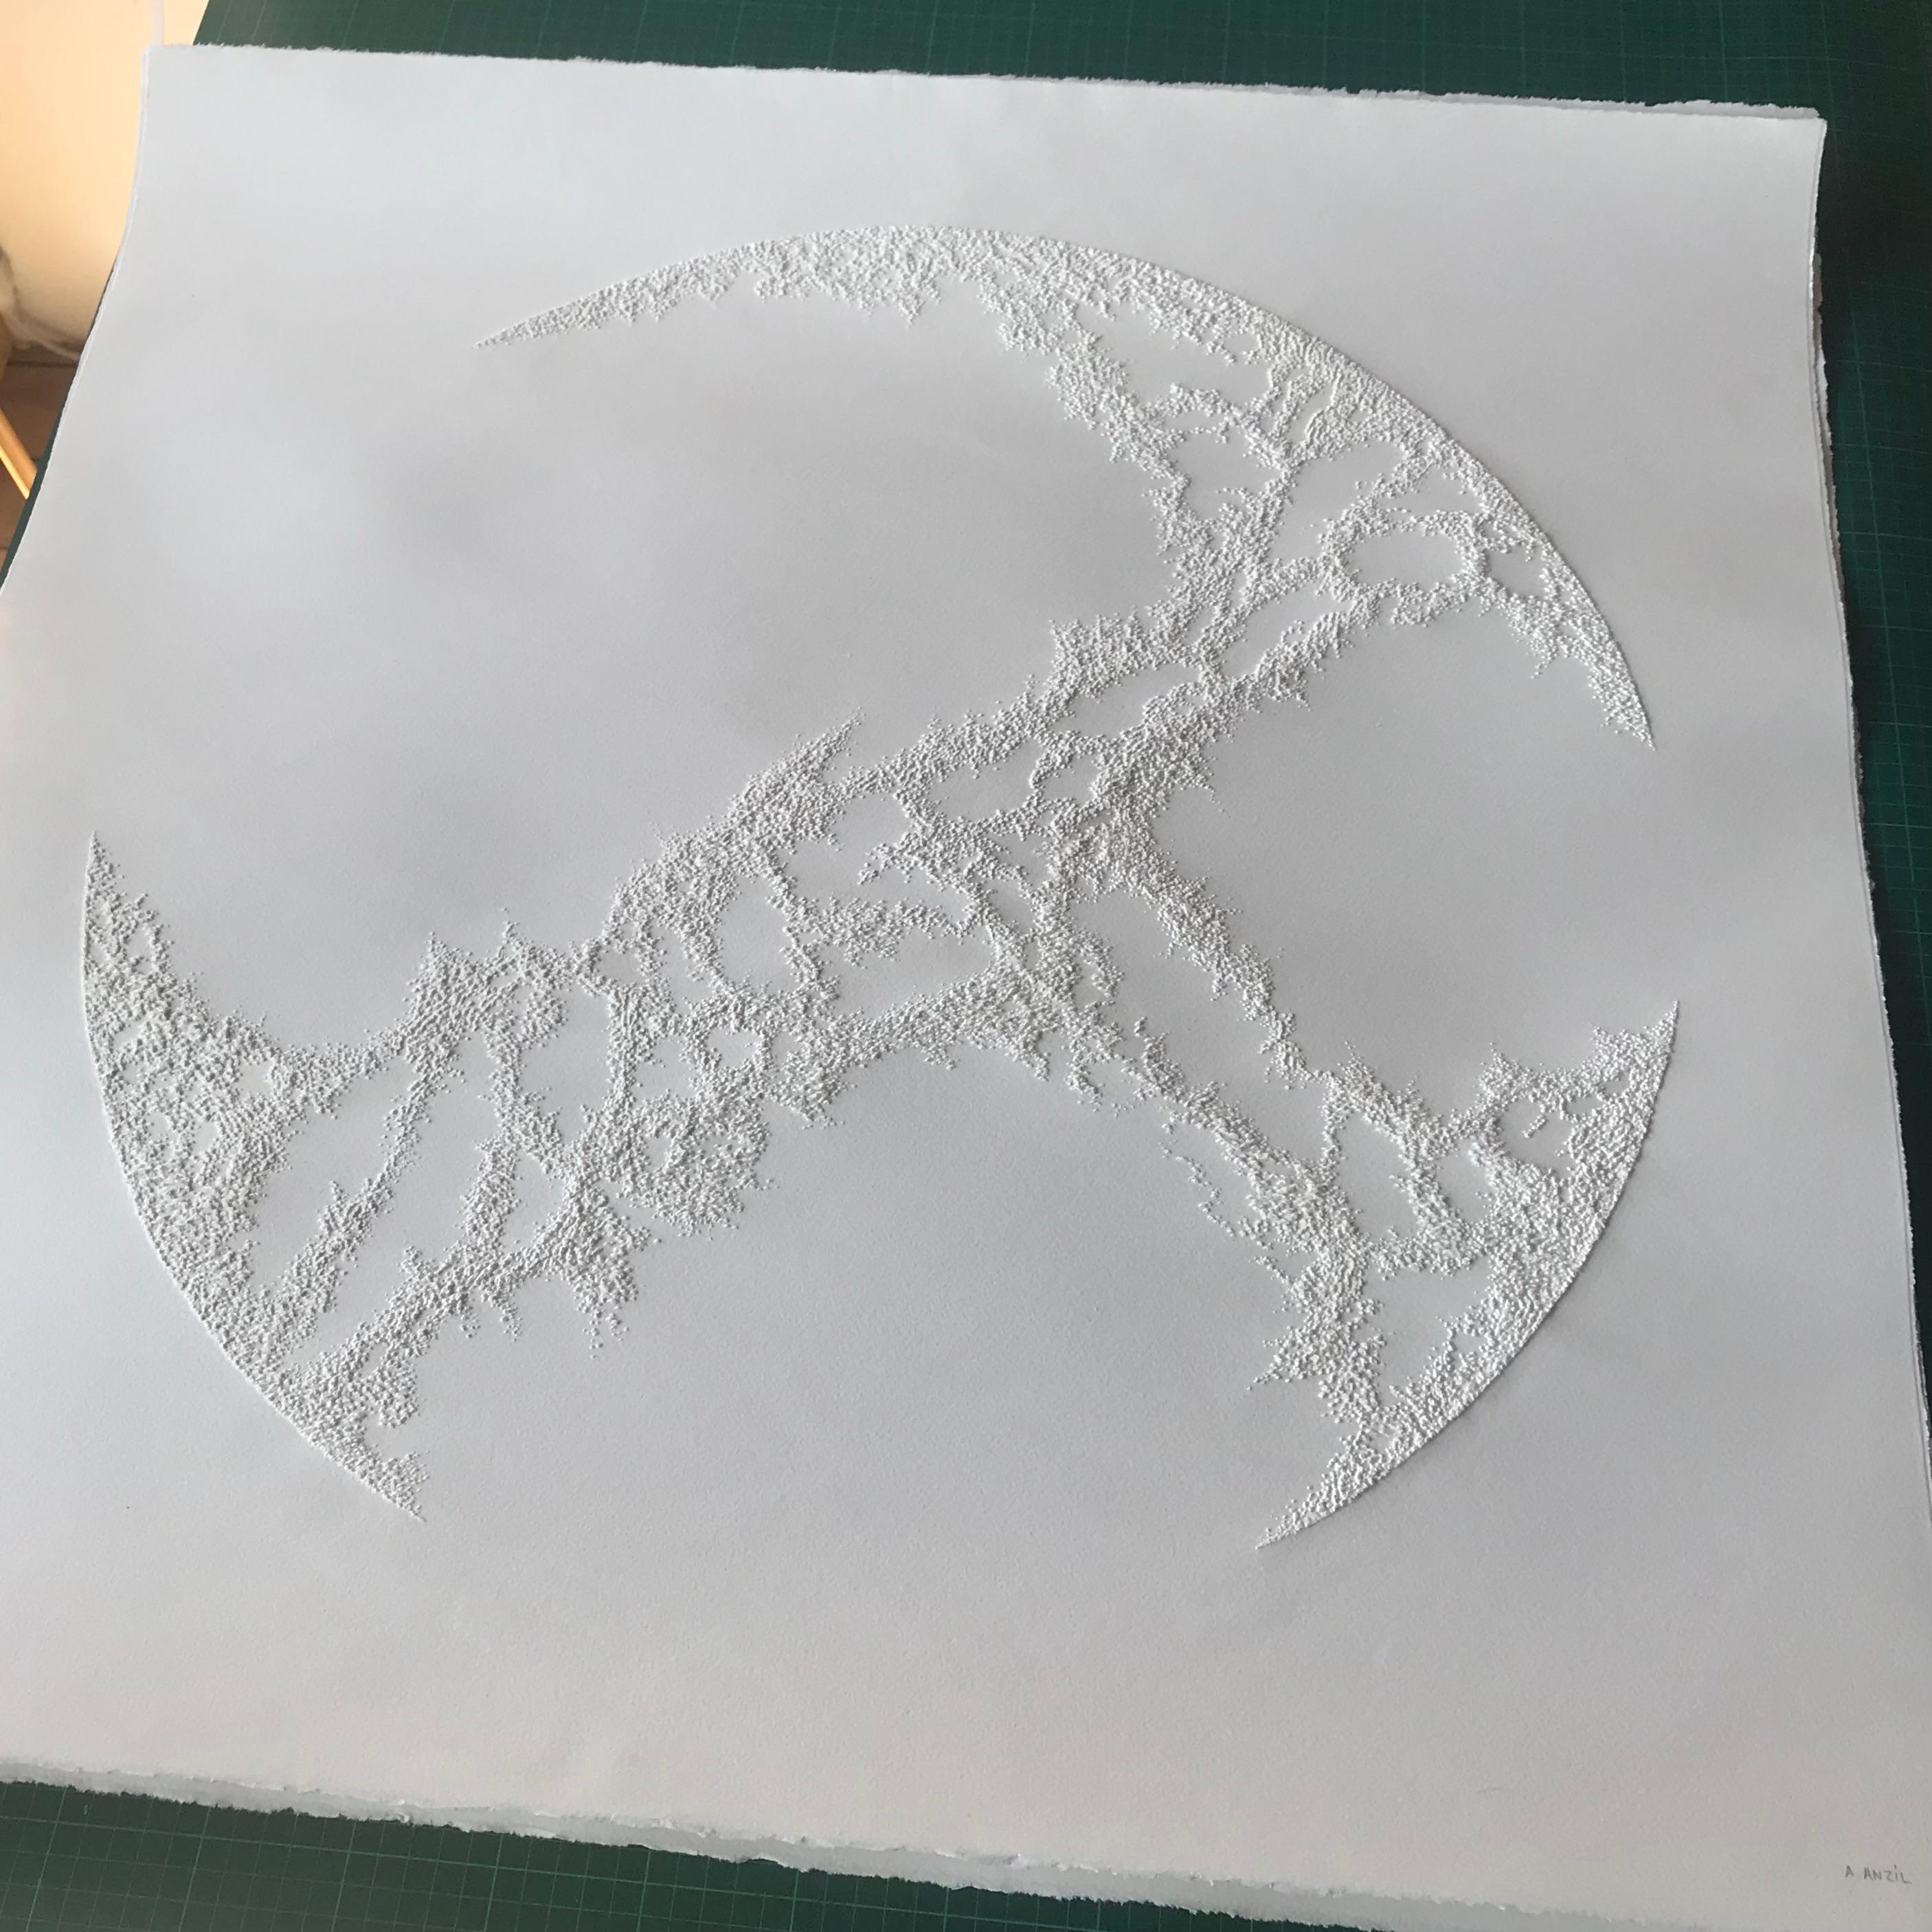 Antonin Anzil Abstract Drawing - Moon Circle 2 - intricate white 3D abstract geometric pulled paper drawing 